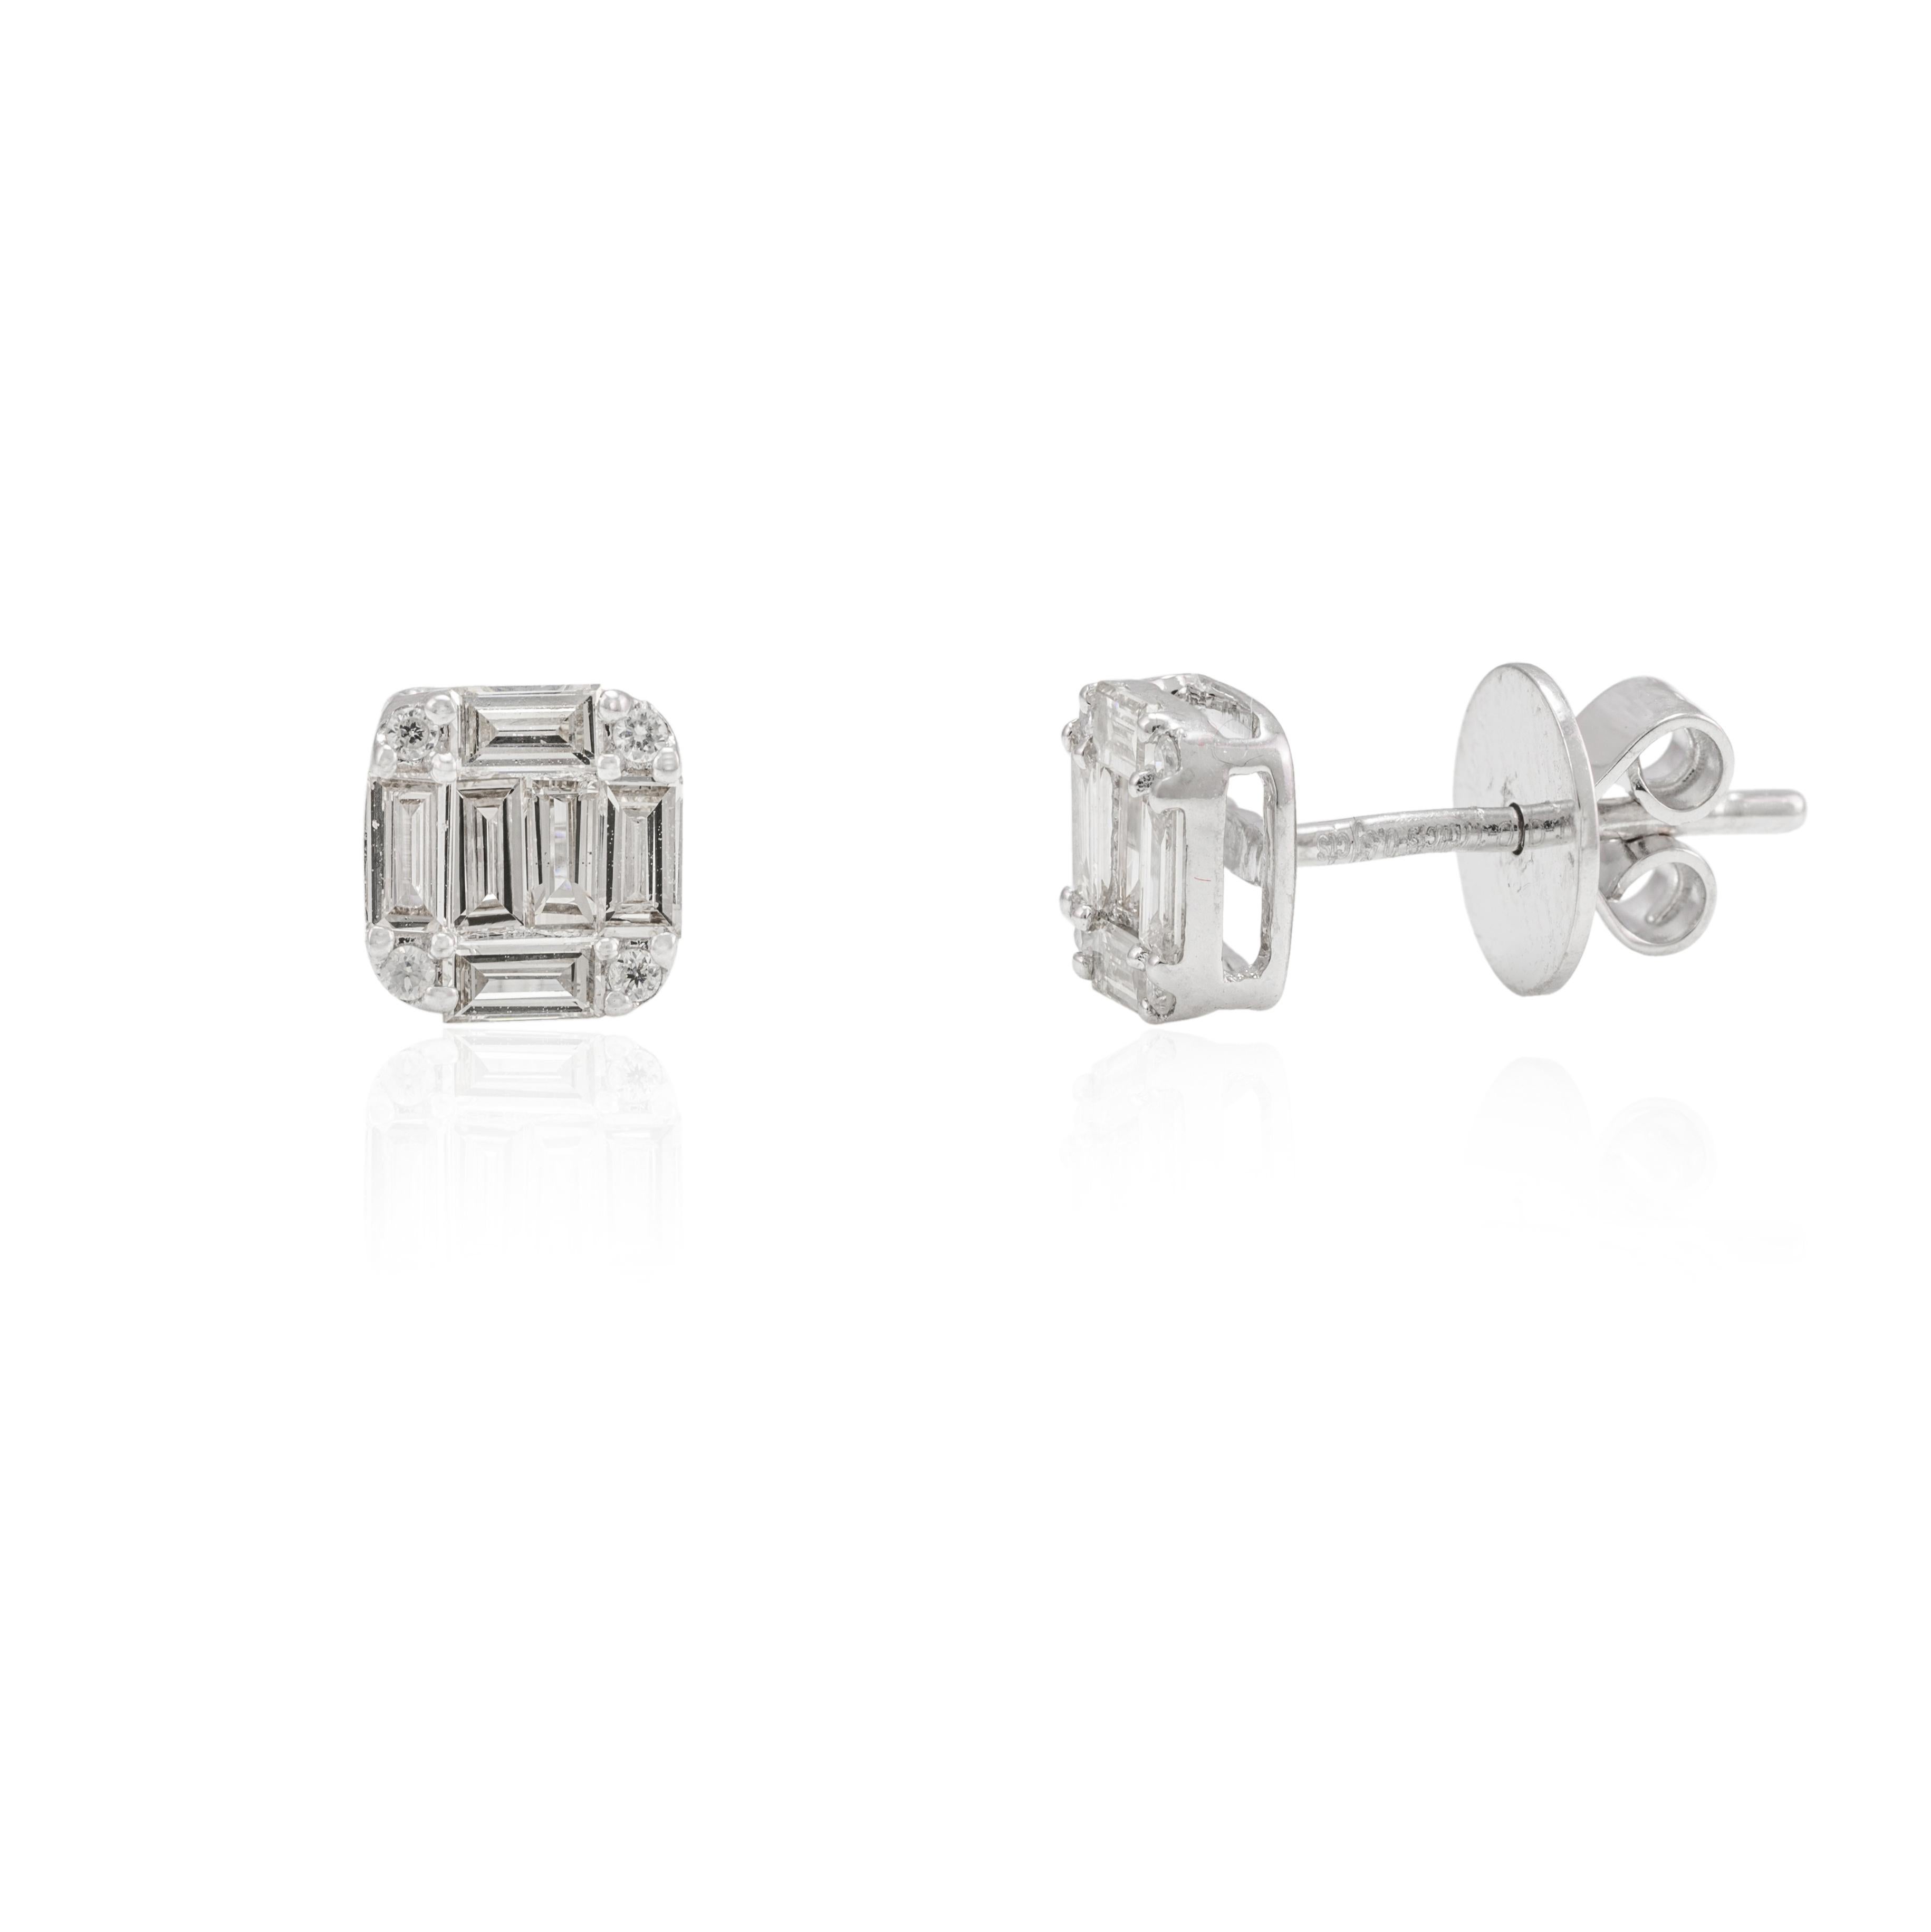 Diamond Cluster Stud Earrings in 18K Gold to make a statement with your look. You shall need stud earrings to make a statement with your look. These earrings create a sparkling, luxurious look featuring round and baguette cut diamonds.
April